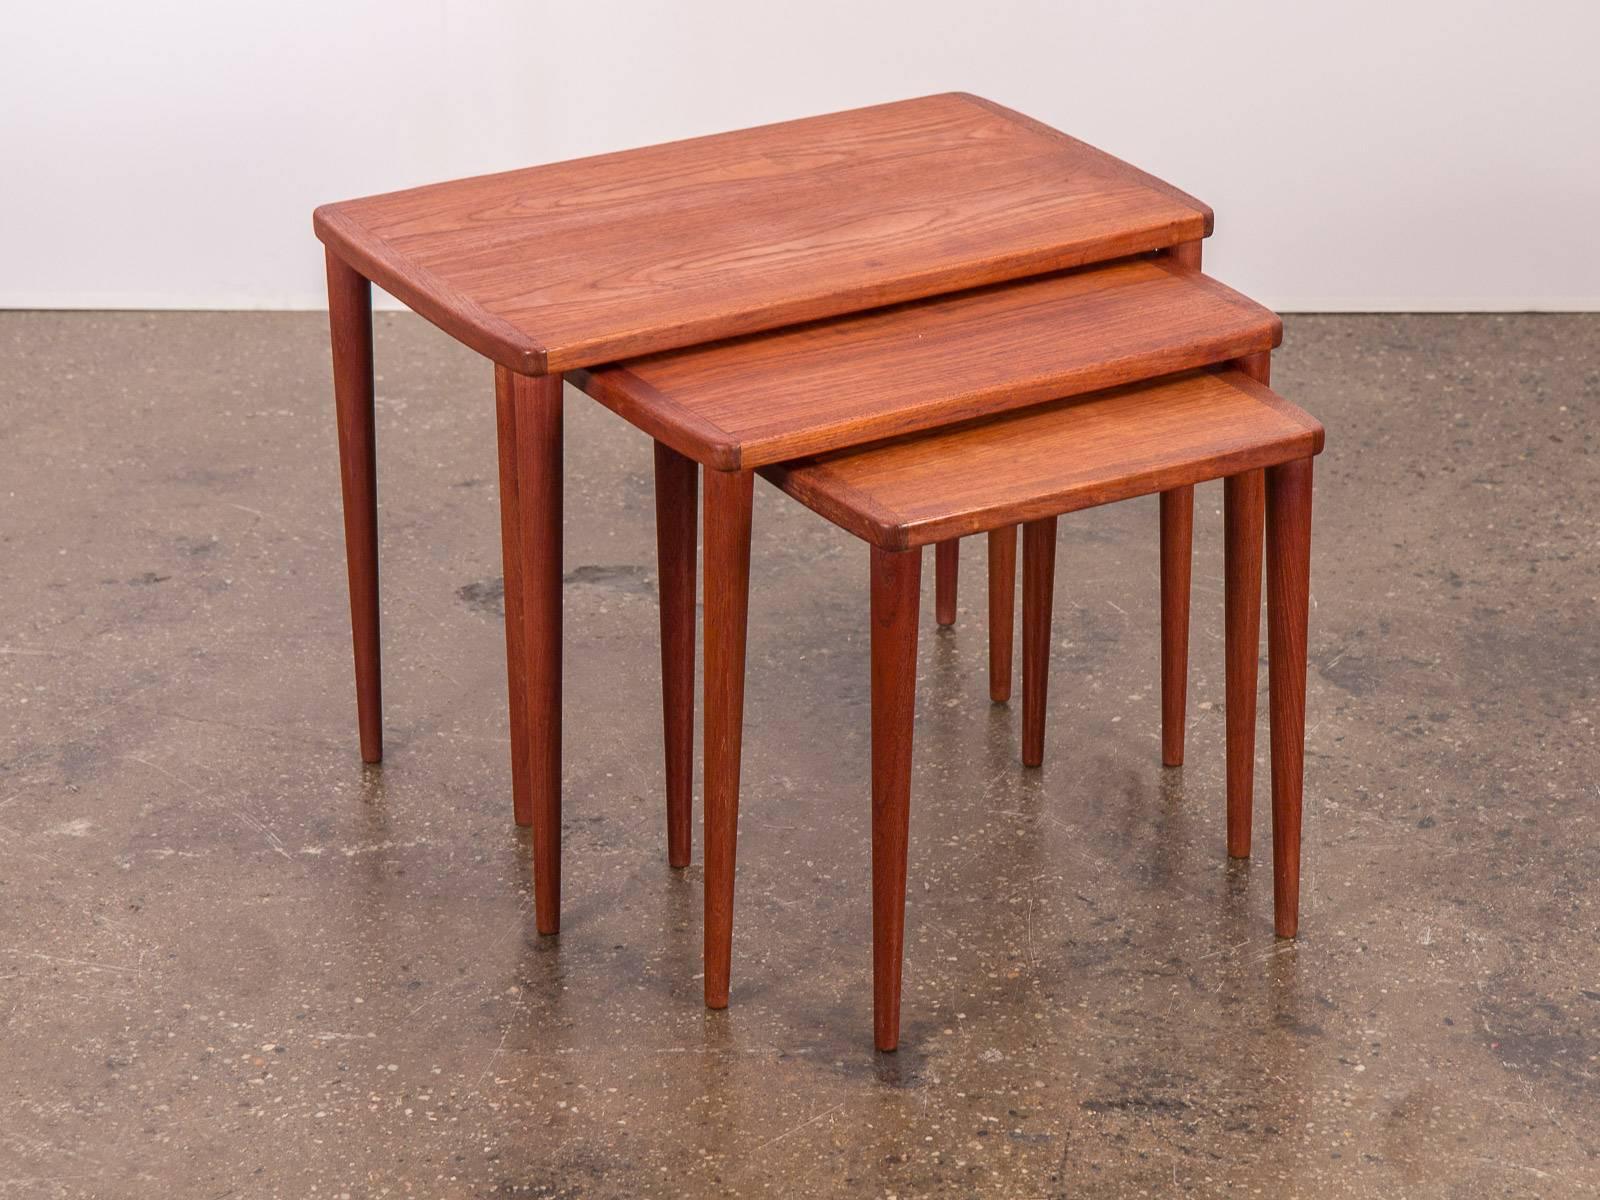 Scandinavian Modern teak nesting tables. Rich, beautiful teak wood selection with tapered legs. Excellent vintage condition. A handsome set of finely crafted tables from the 1960s. Made in Sweden.